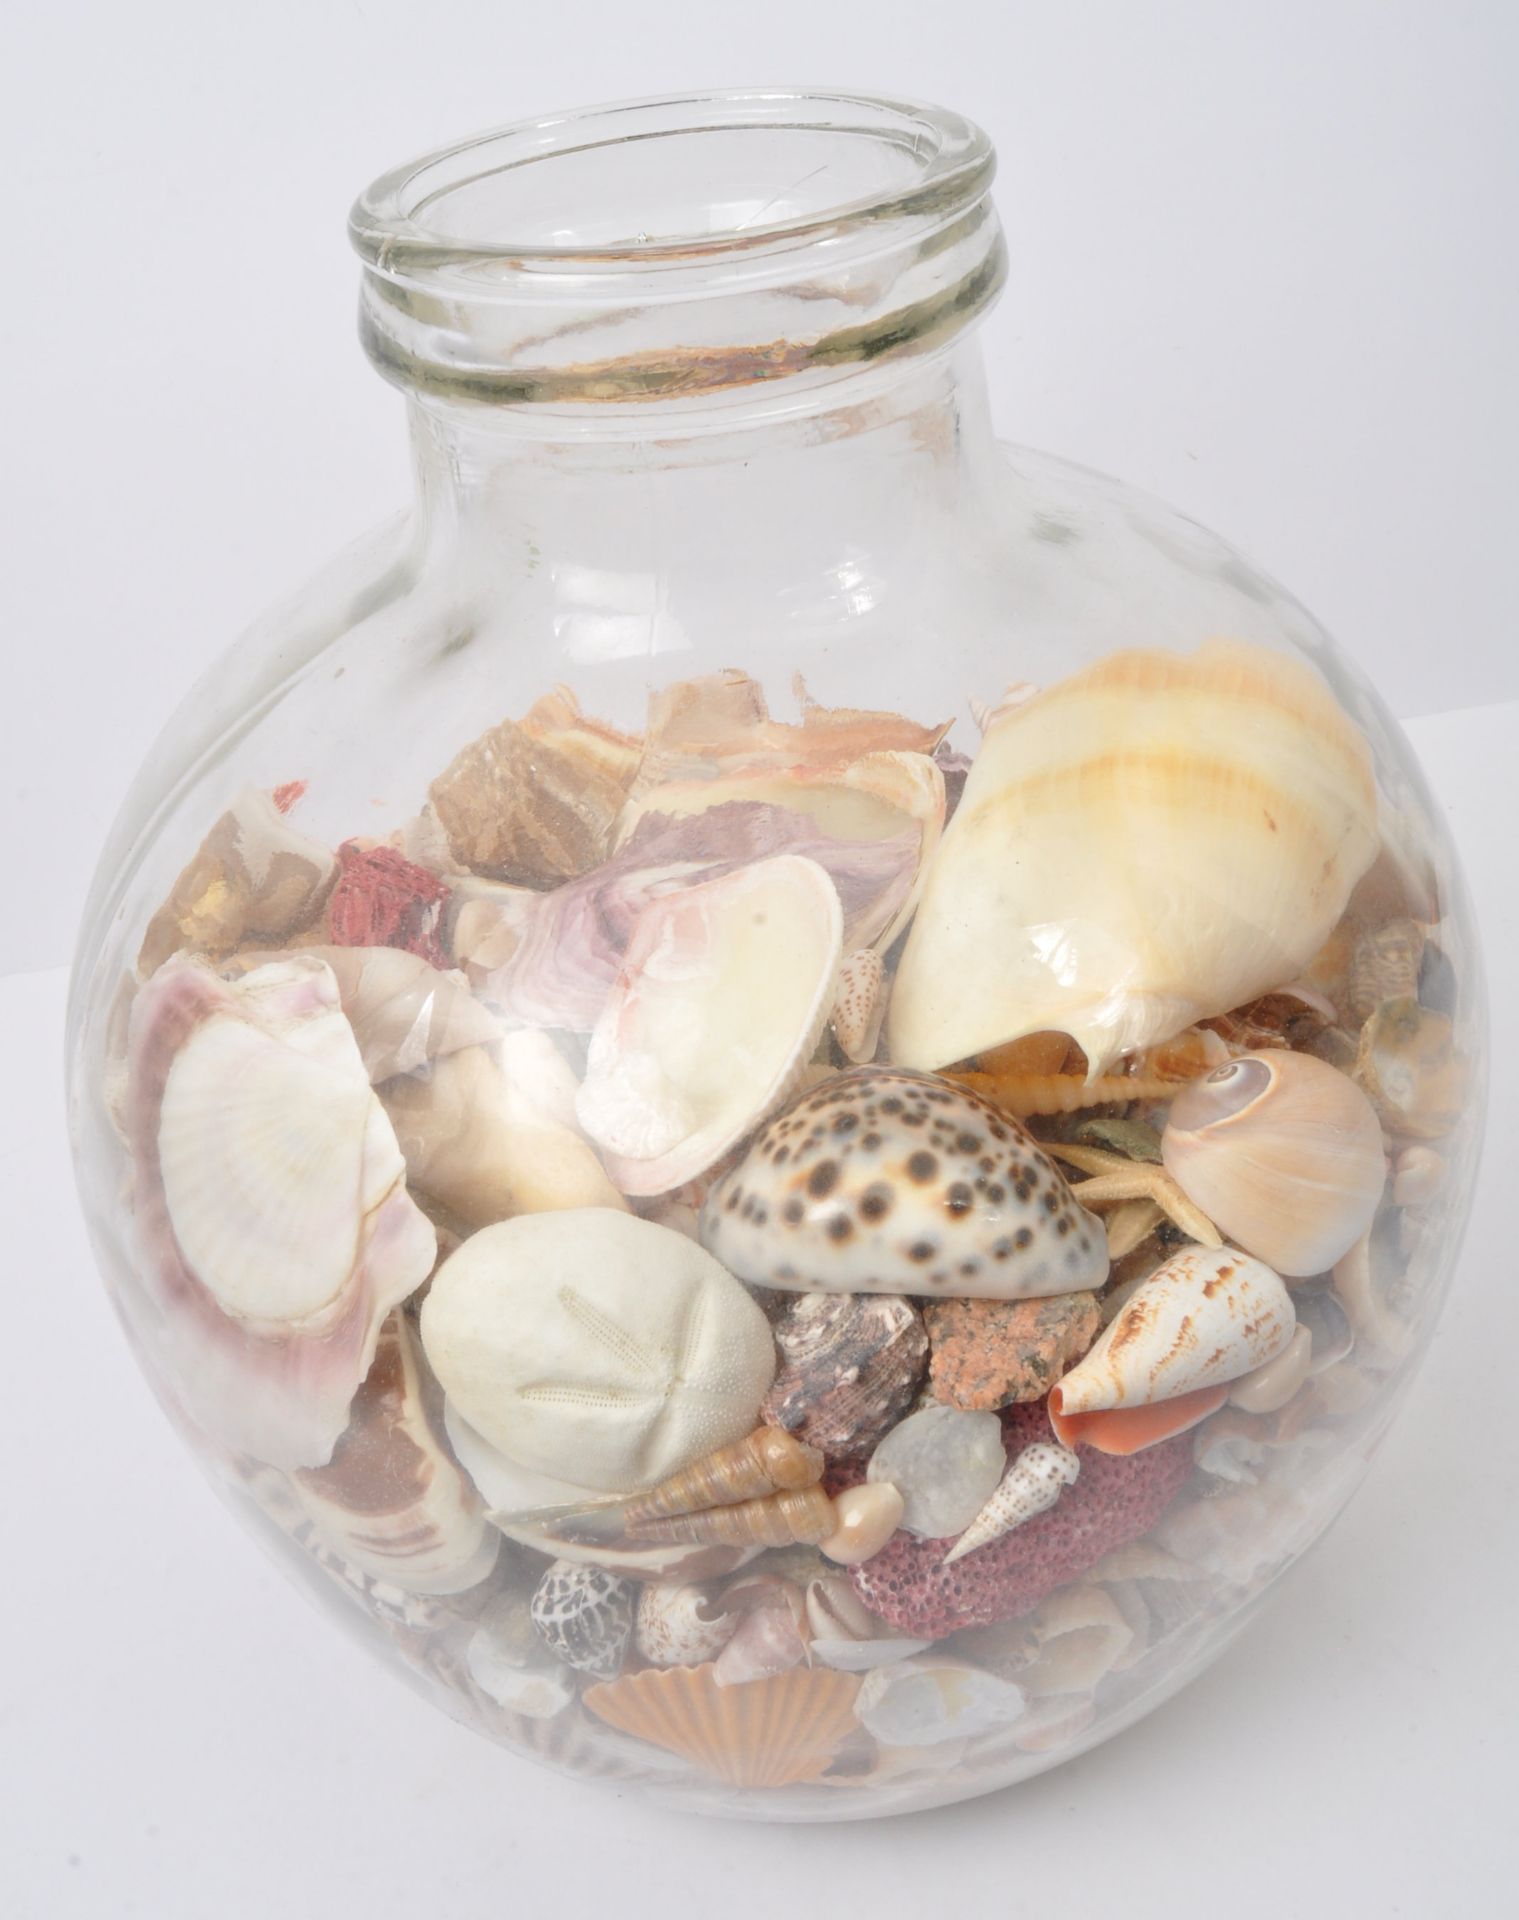 COLLECTION OF SEASHELLS IN GLASS TERRARIUM - Image 2 of 5